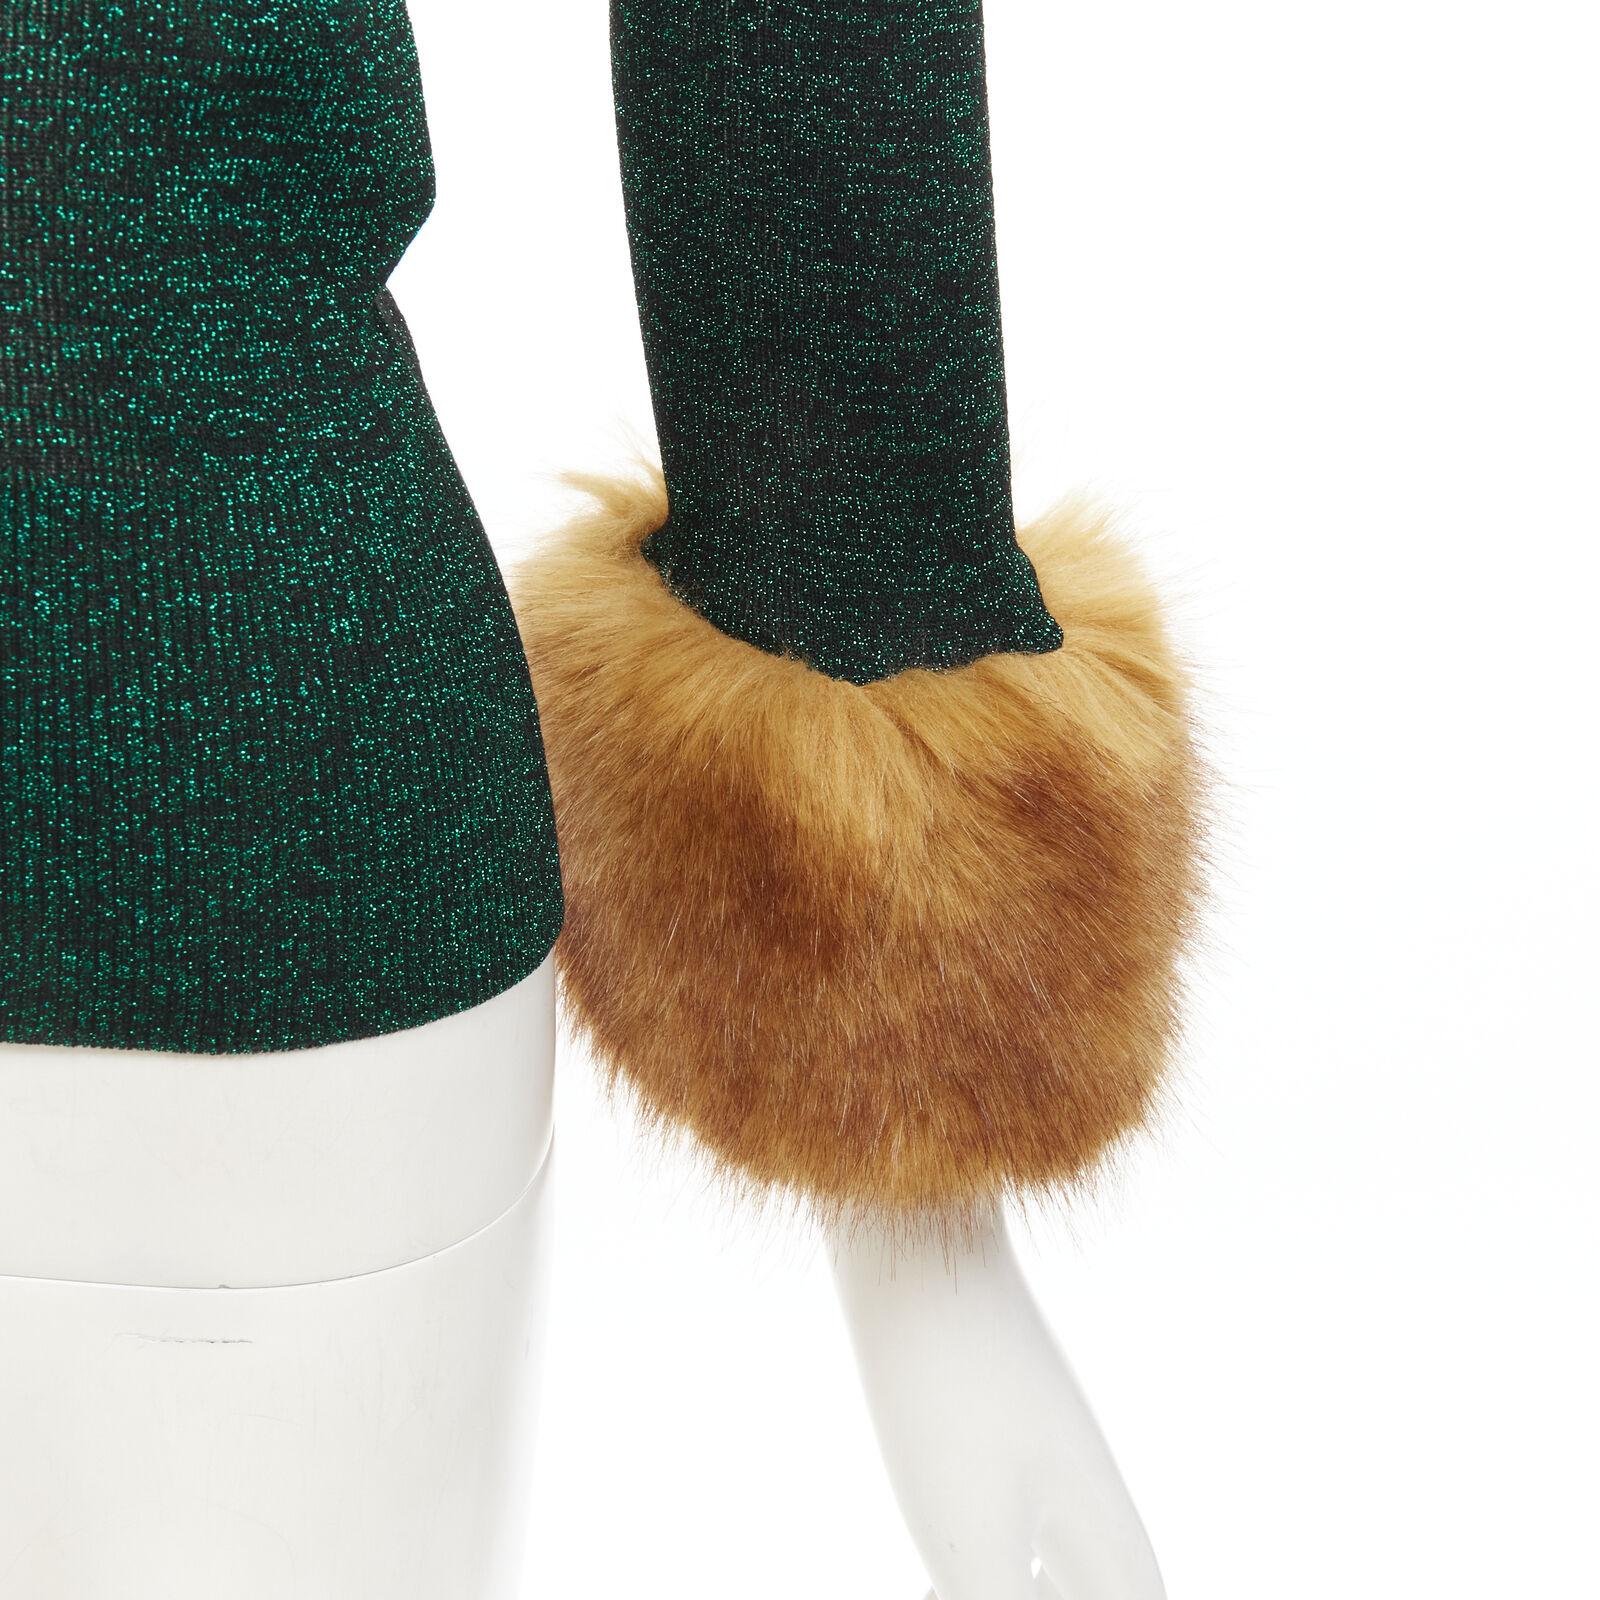 SAINT LAURENT metallic green lurex black faux fur trim ribbed top XS
Reference: AAWC/A00219
Brand: Saint Laurent
Designer: Anthony Vaccarello
Collection: 2021
Material: Viscose, Blend
Color: Green, Brown
Pattern: Solid
Extra Details: Ribbed knit.